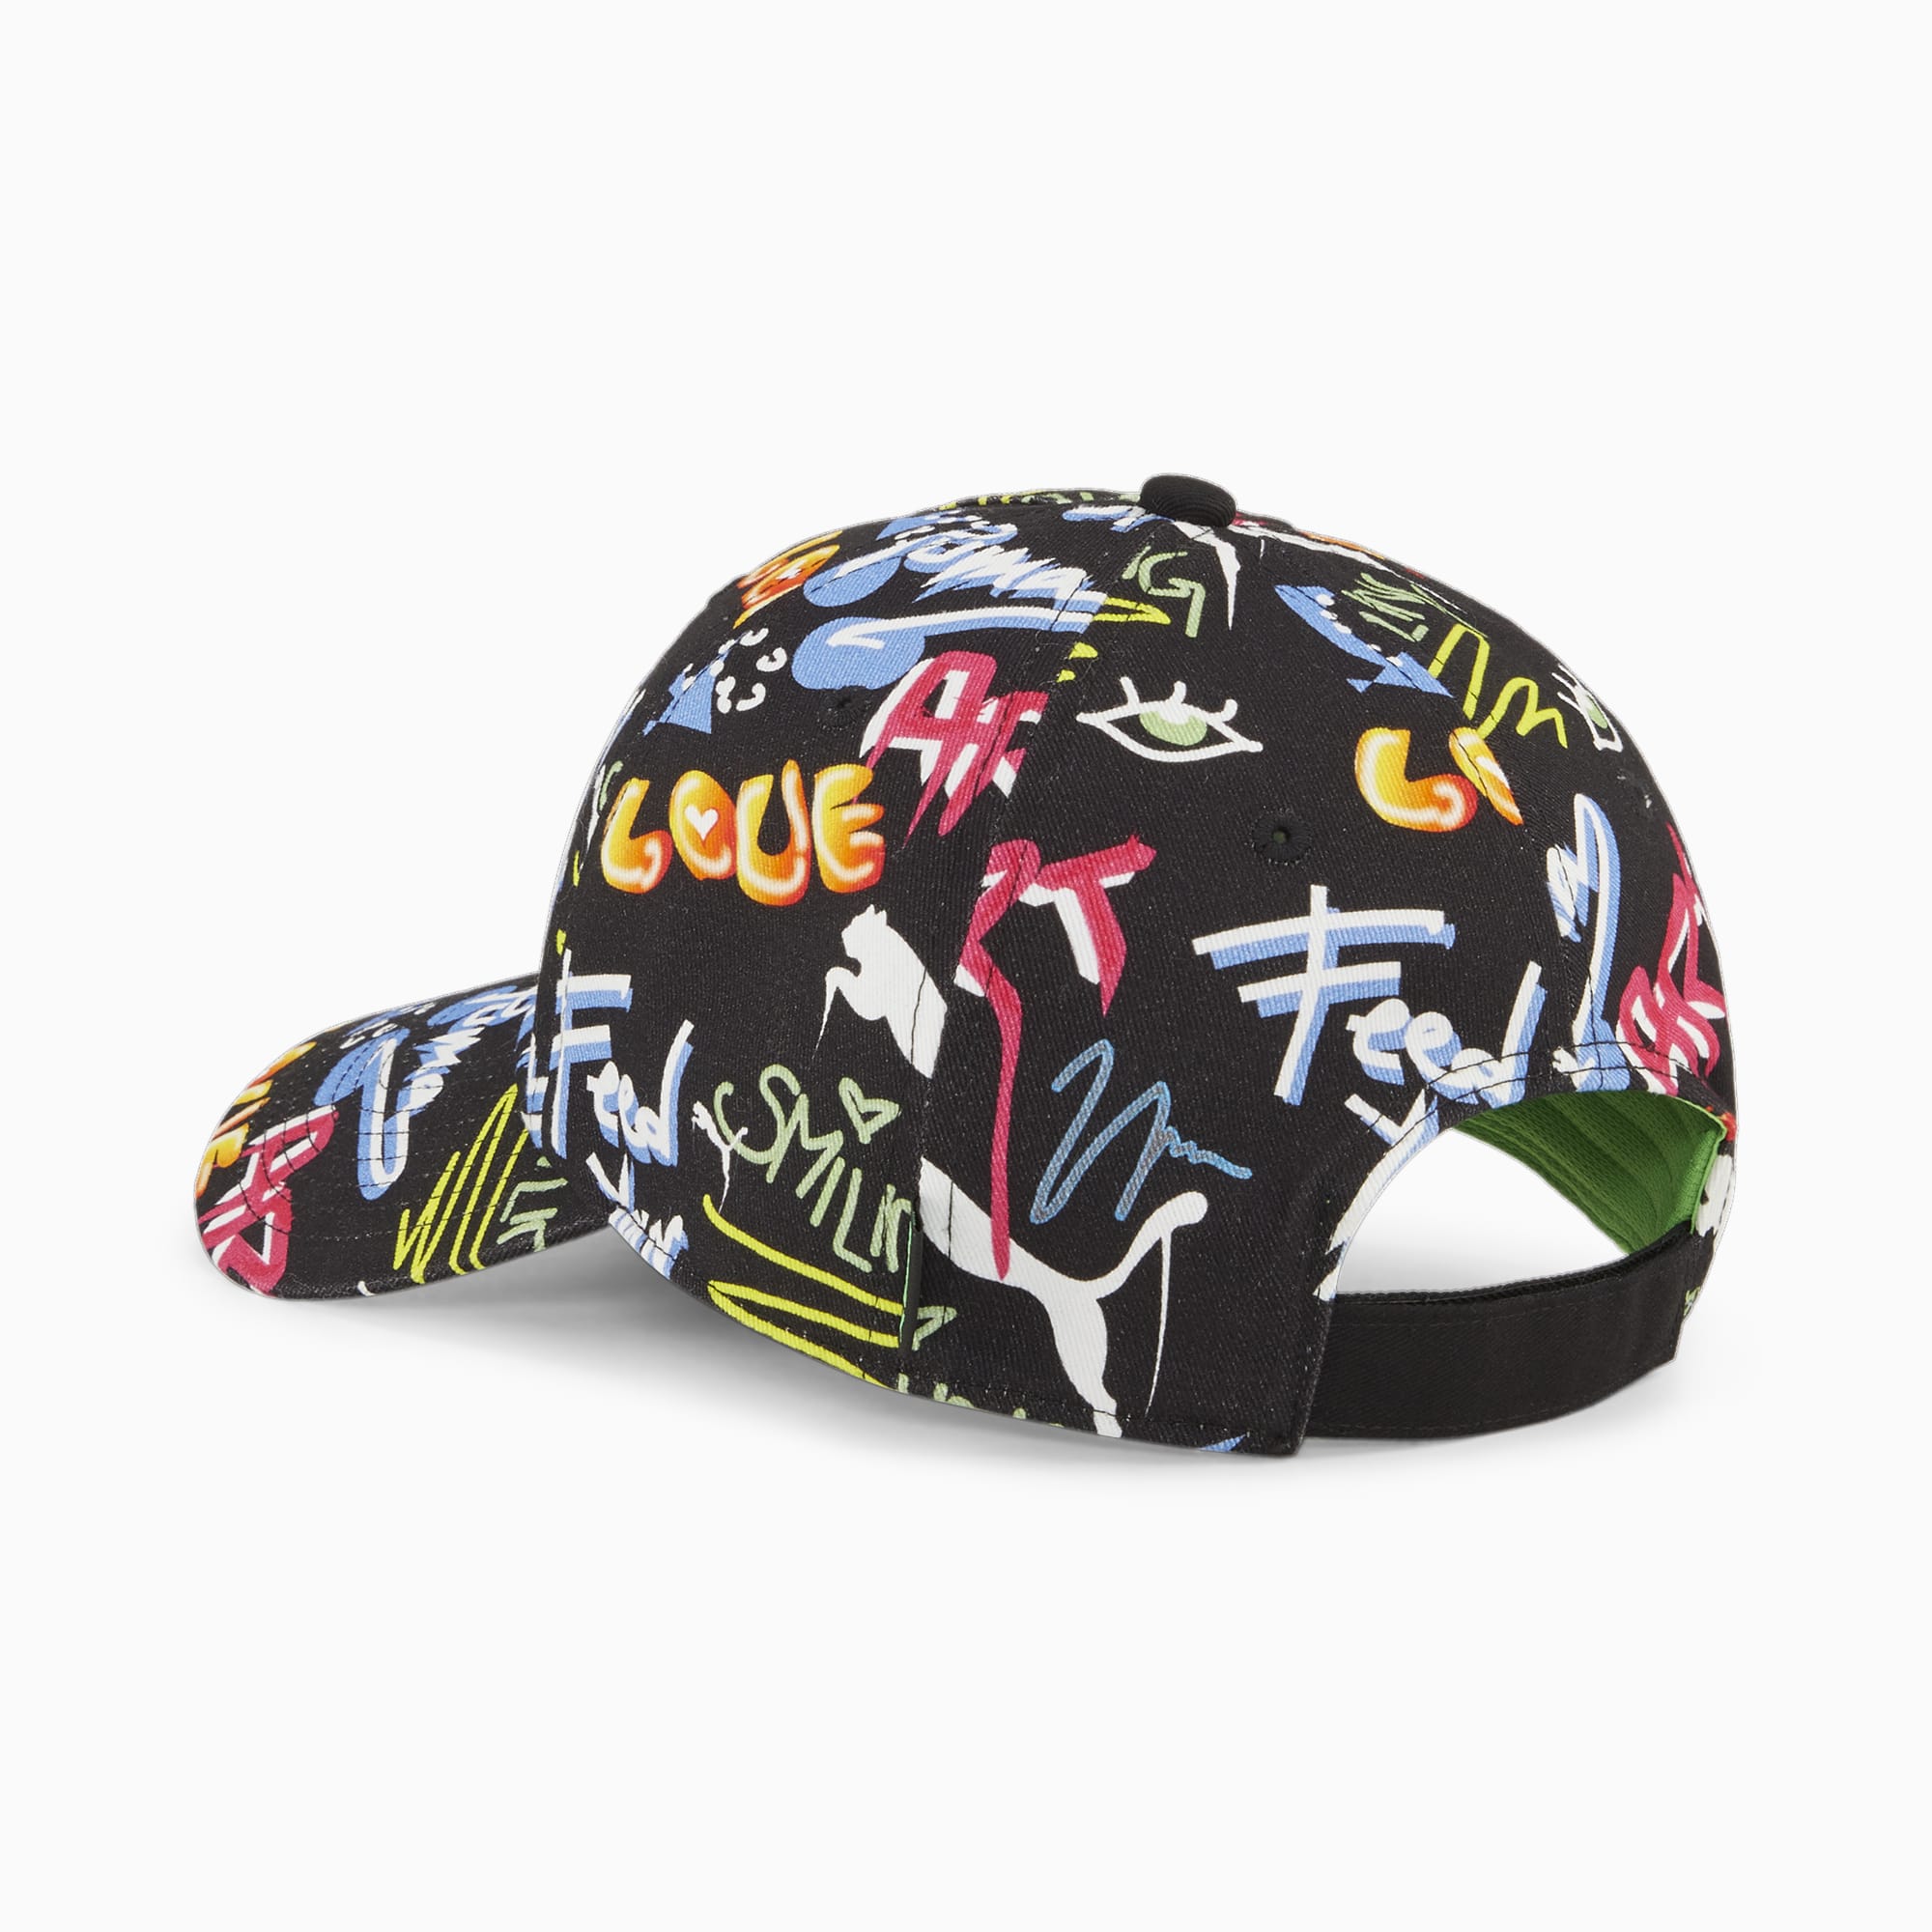 FEED YOUR PUMA Cap Teenager Für Kinder, Mit Abstract Muster, Schwarz, Accessoires